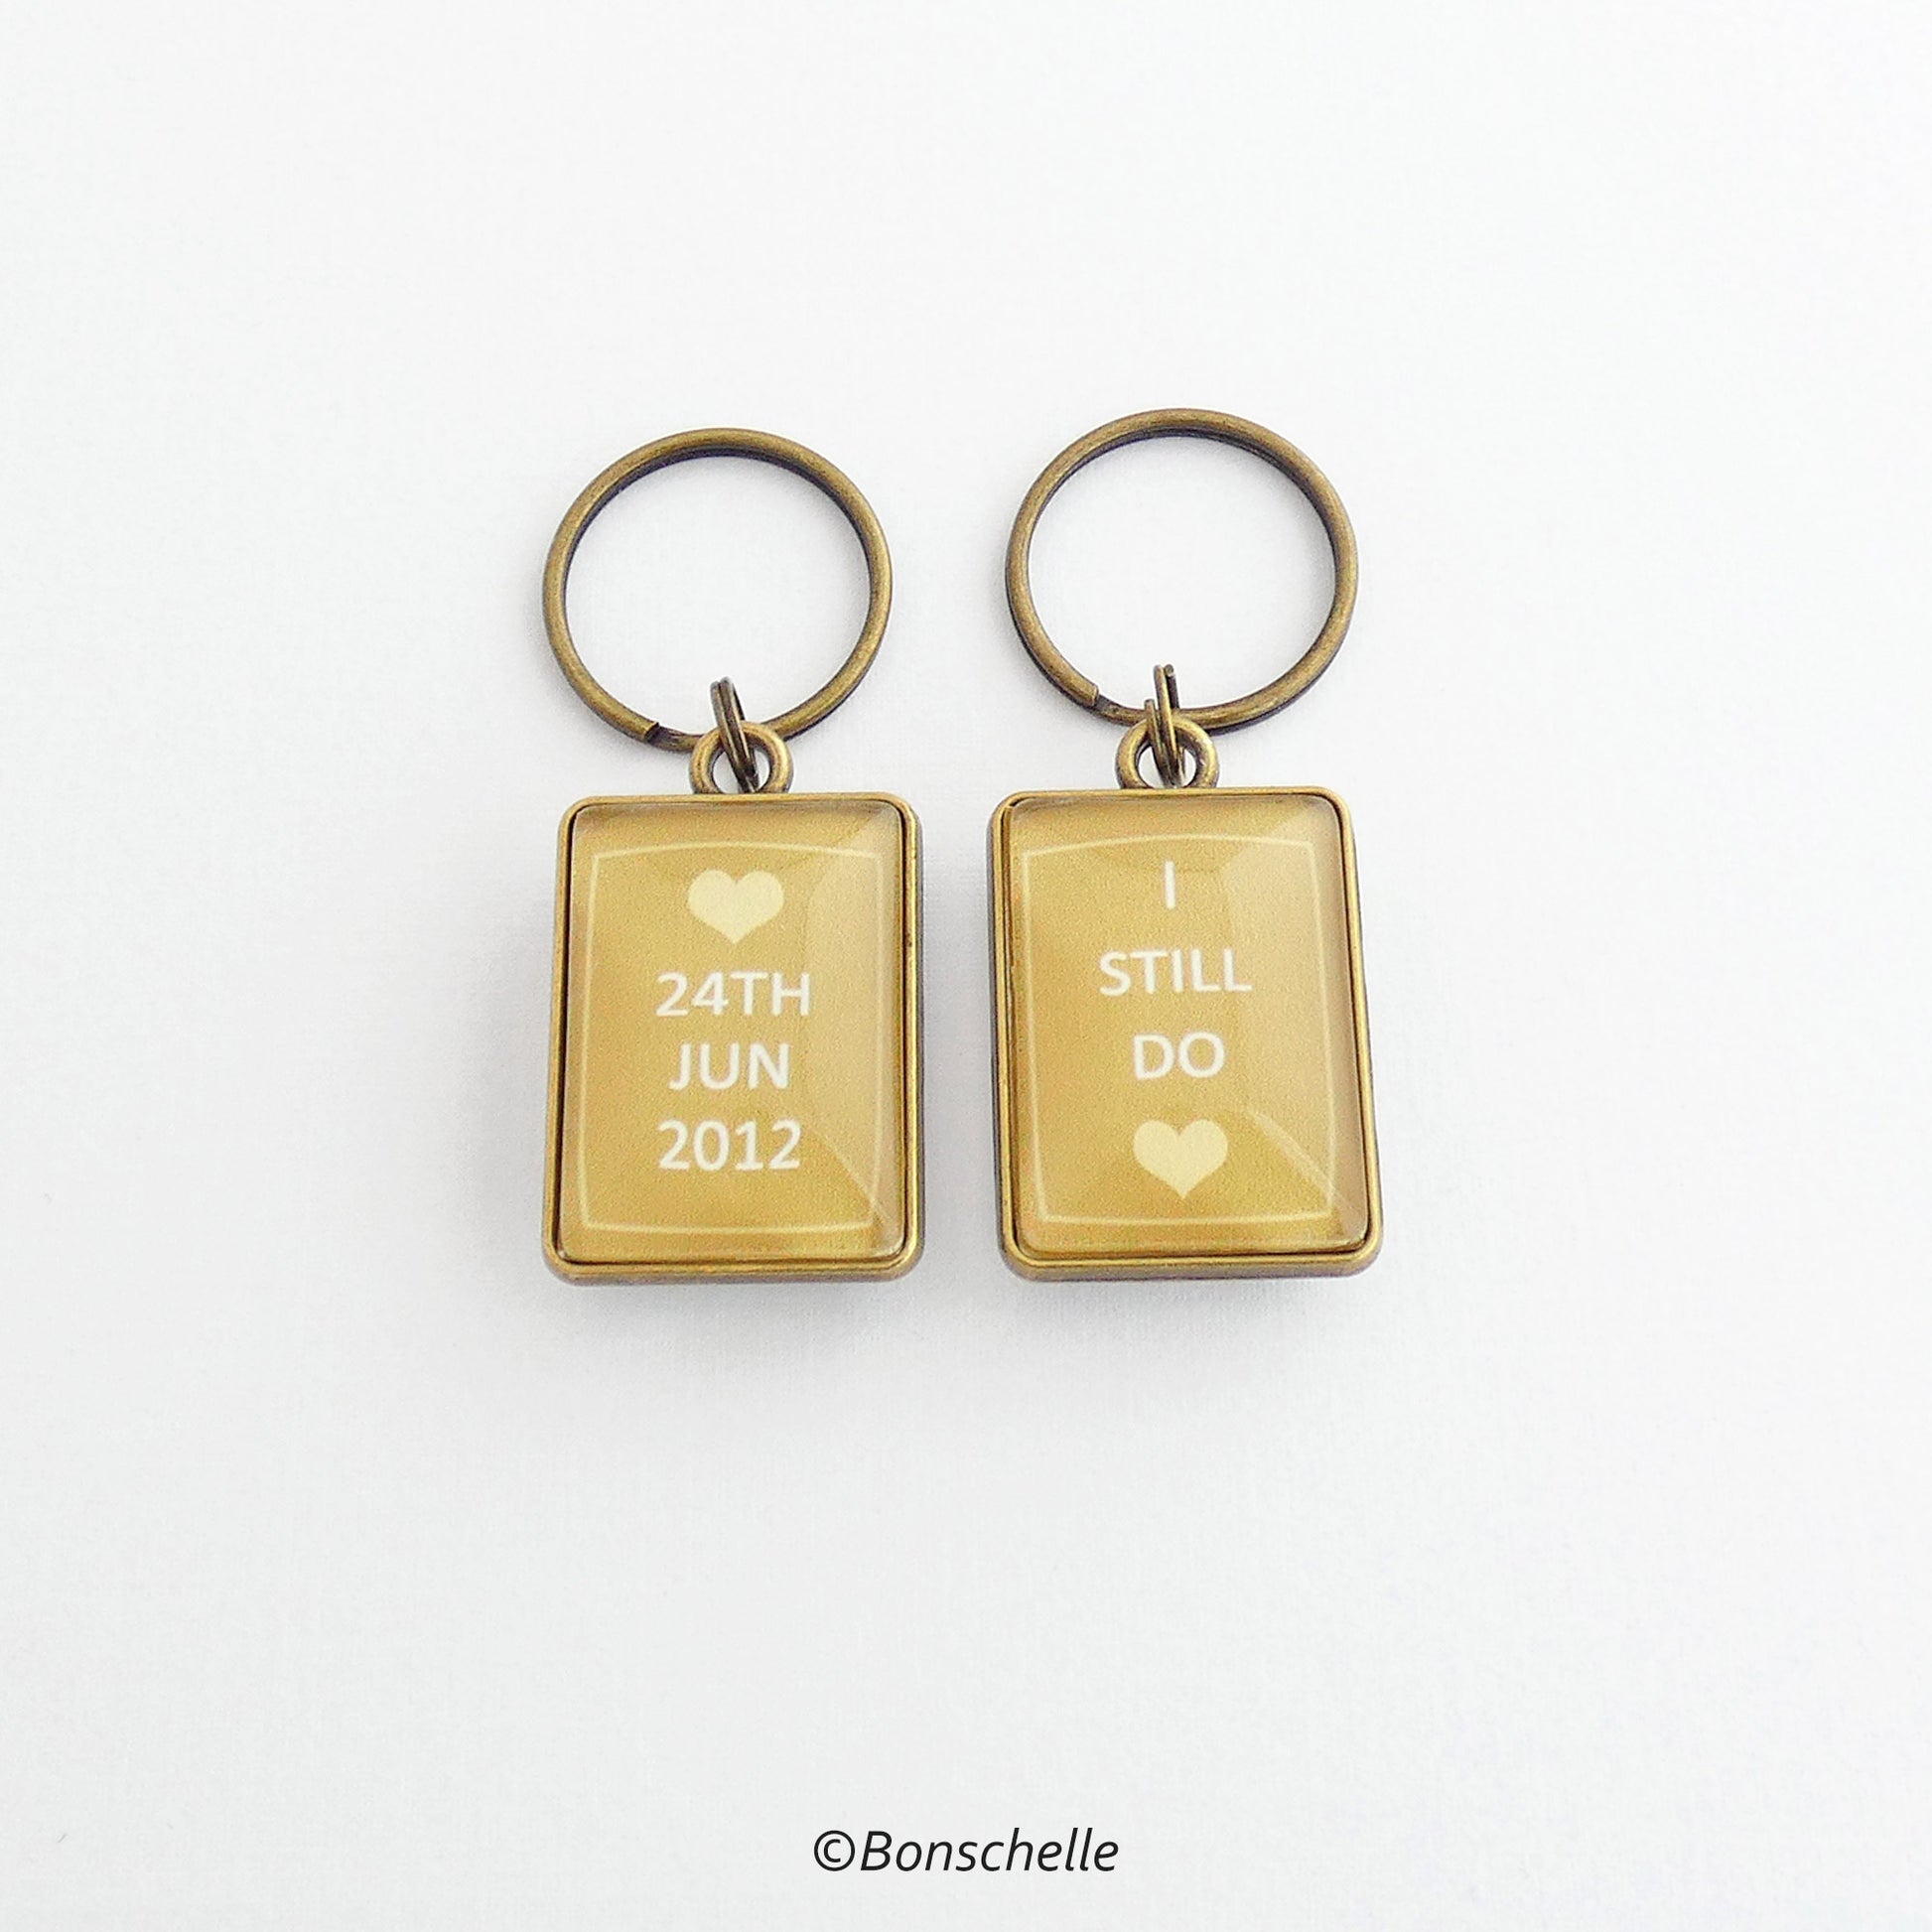 front and back view of the bronze toned metal and glass cabochon rectangle shape keyring for bronze anniversary with personalised date and the worlds I still do